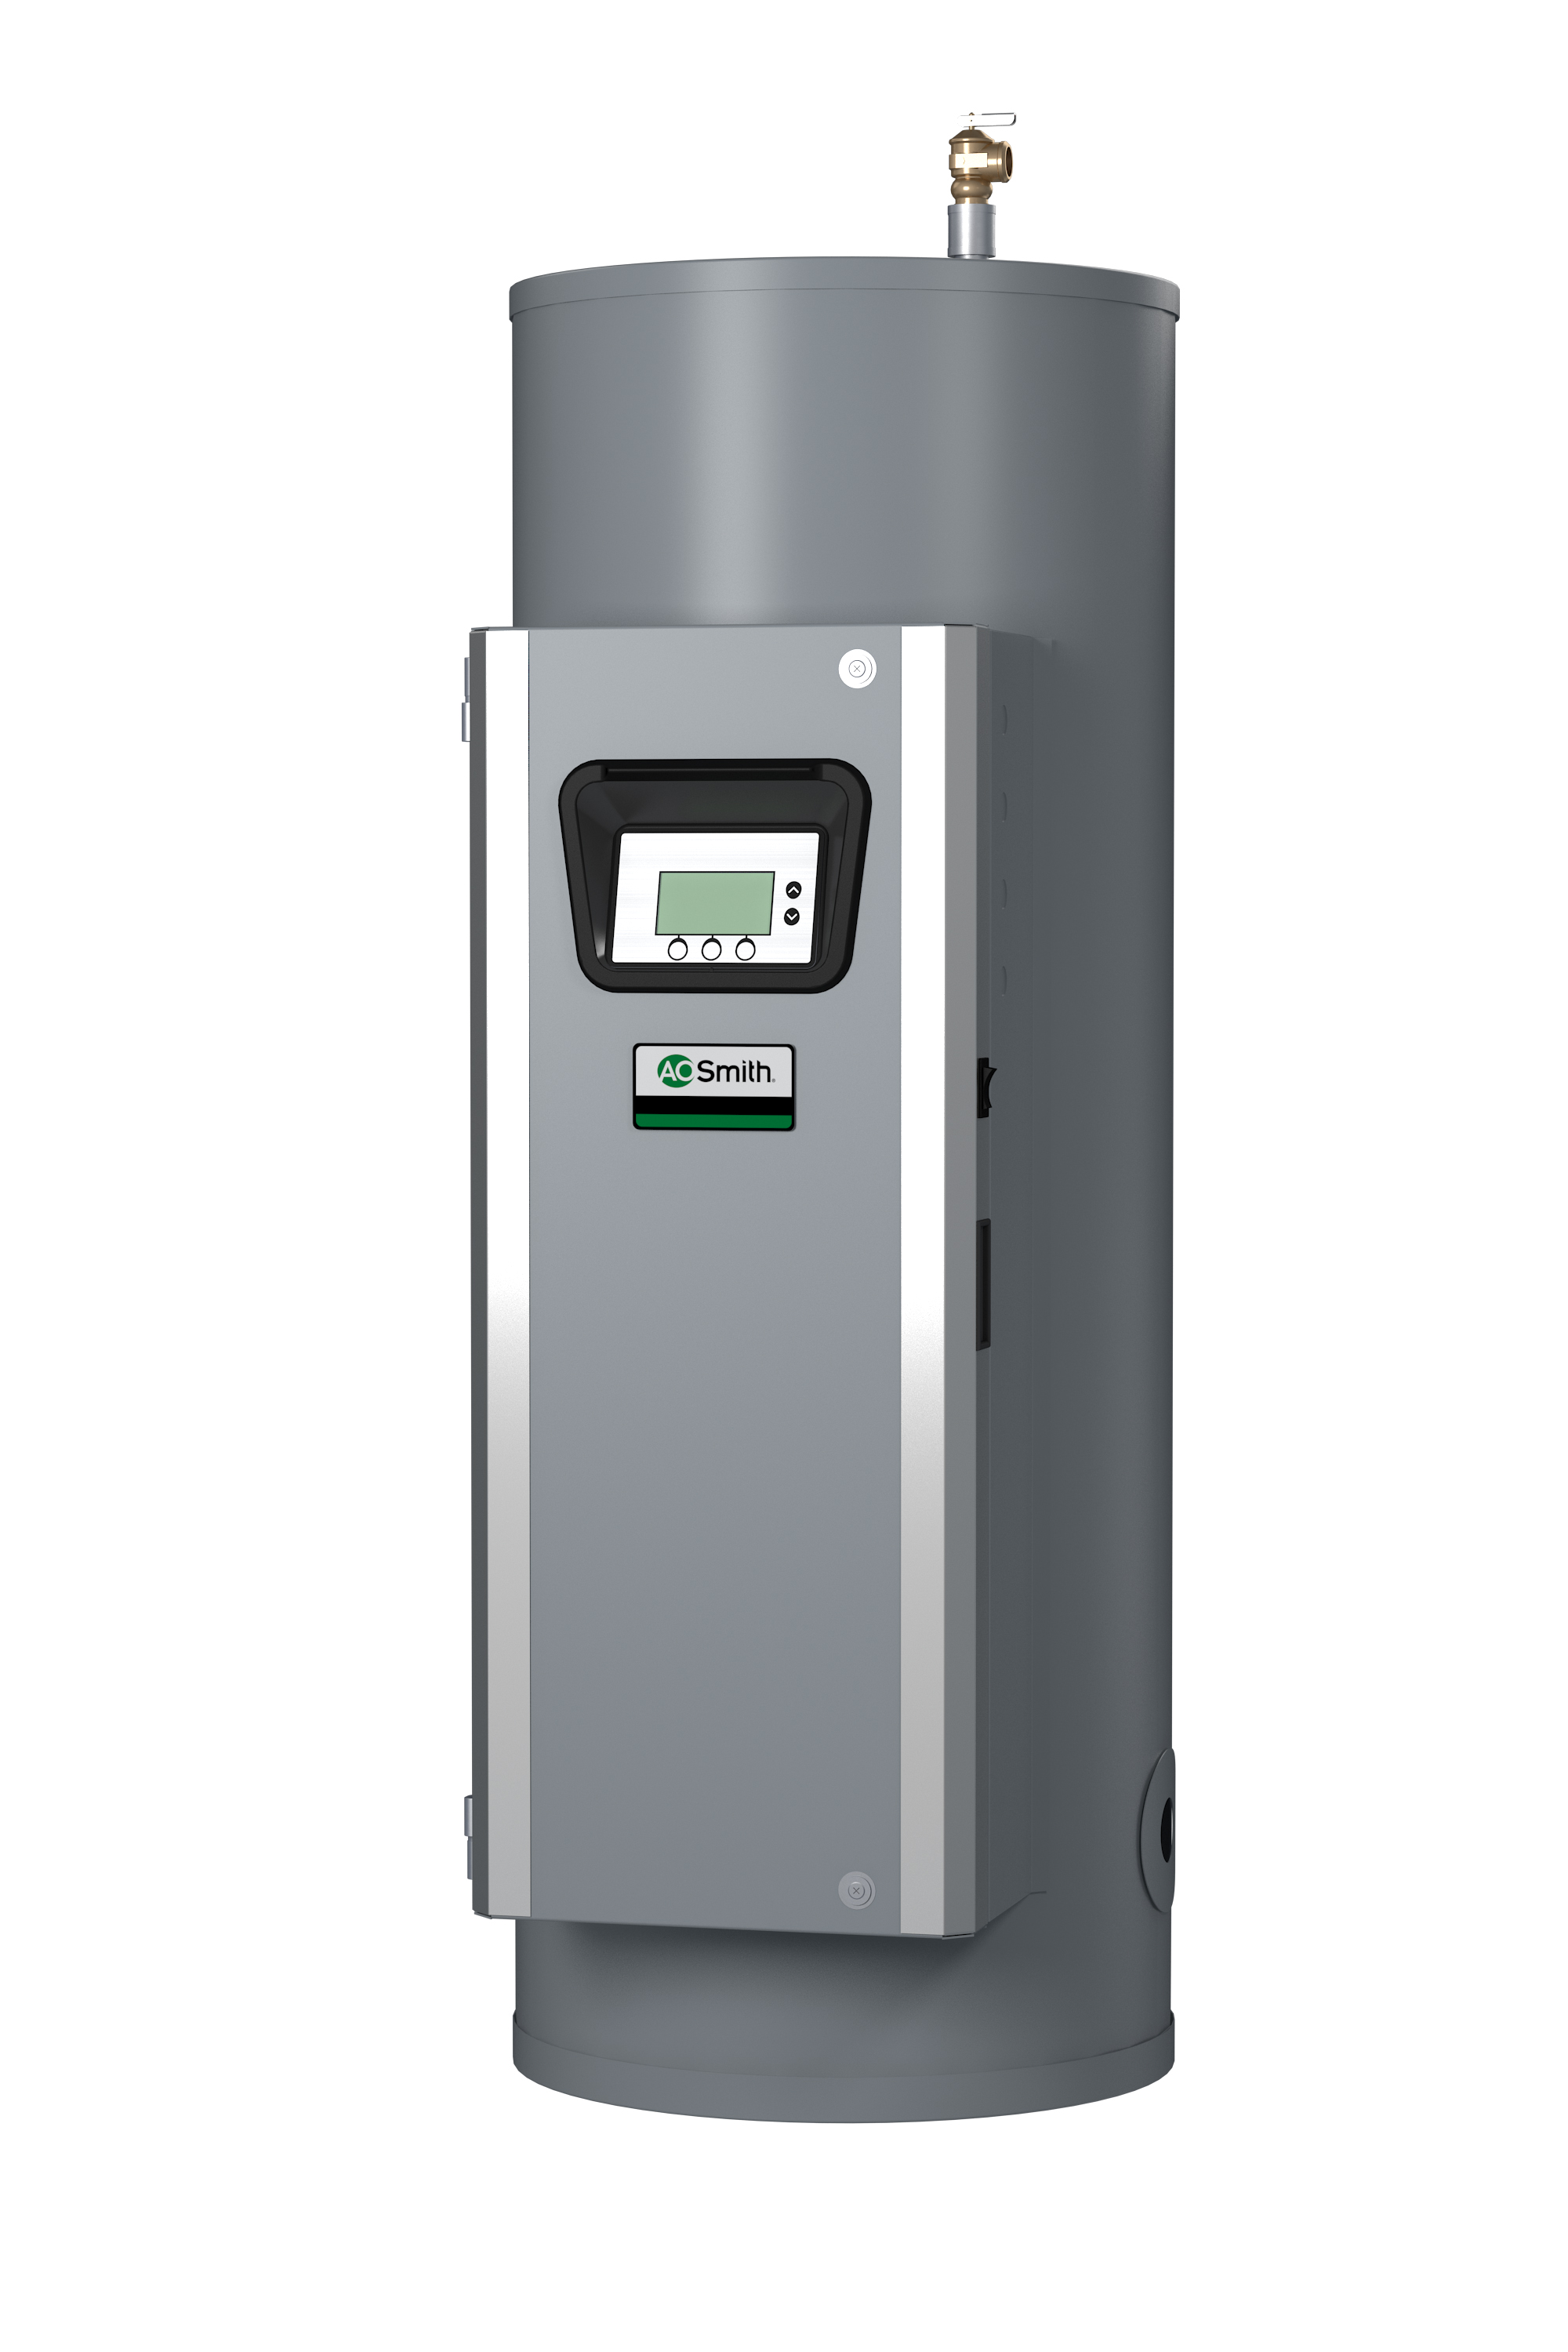 AO SMITH DSE-100A-36, 100 GALLONS, 36KW, 240 VOLT, 86.6 AMPS, 3 PHASE, 2 ELEMENTS, ASME CUSTOM Xi SERIES HEAVY DUTY COMMERCIAL ELECTRIC WATER HEATER